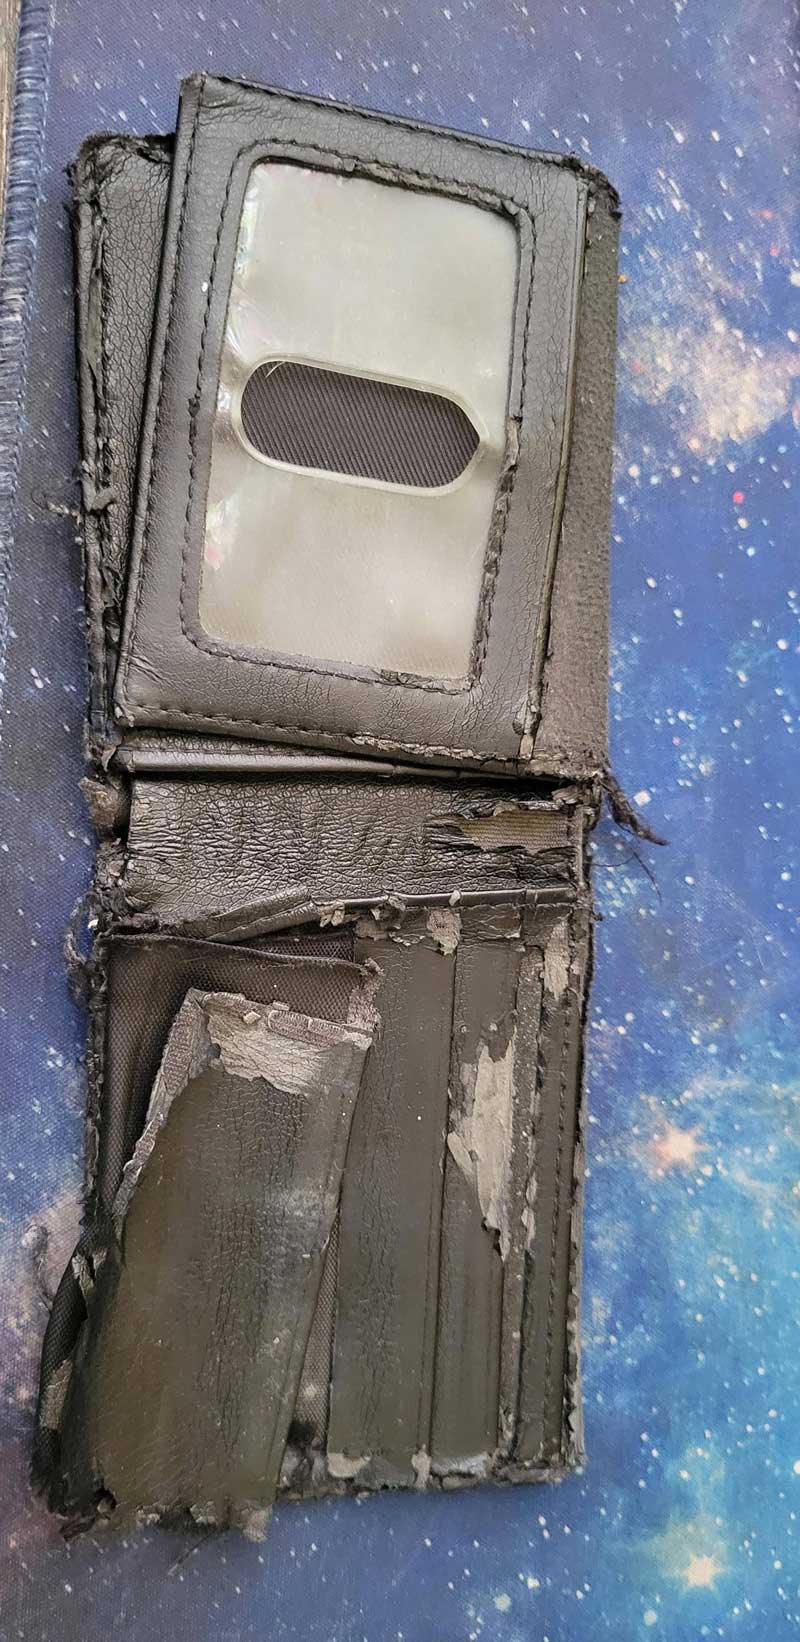 My girlfriend said I need a new wallet, I really don't see why. My old works just fine